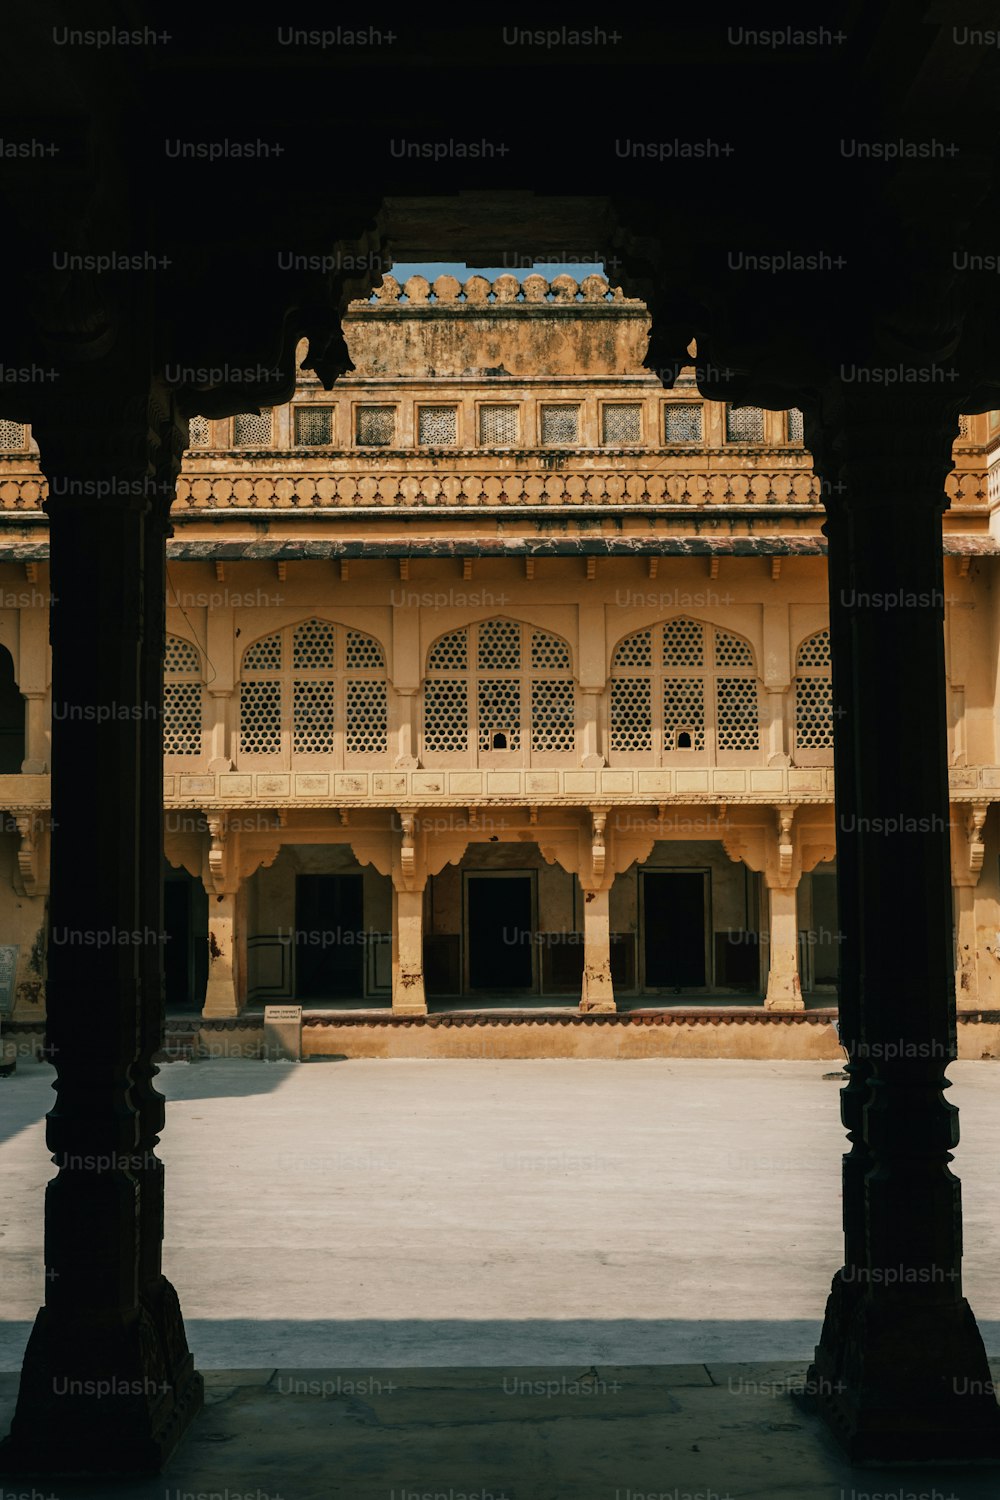 a view of a building through two pillars